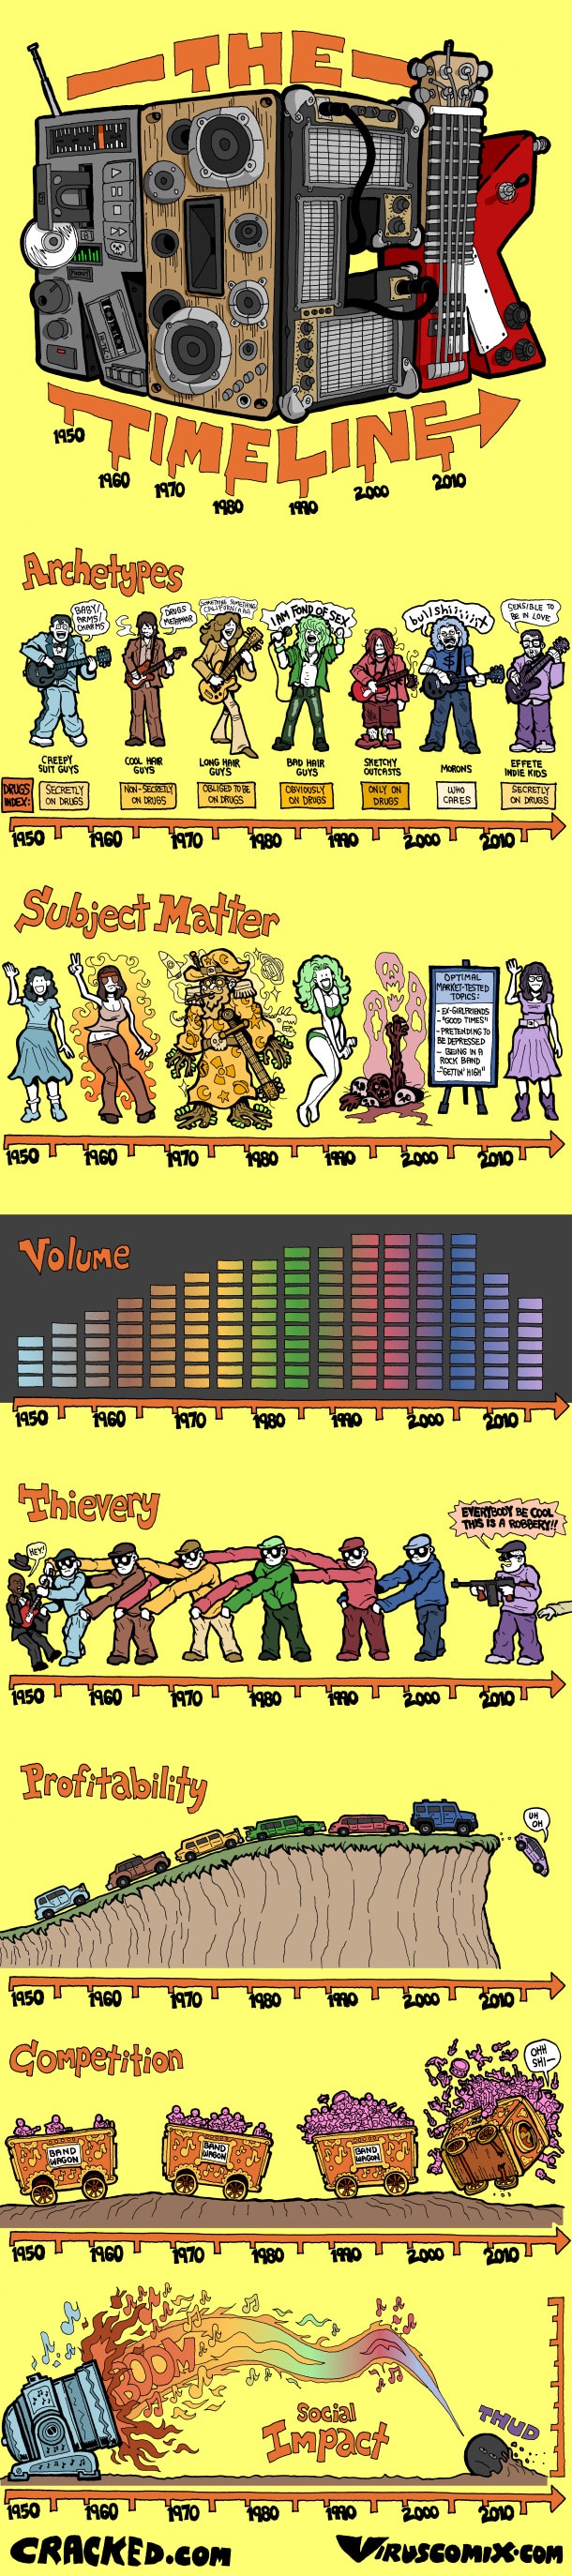 The Rock History Timeline Infographic